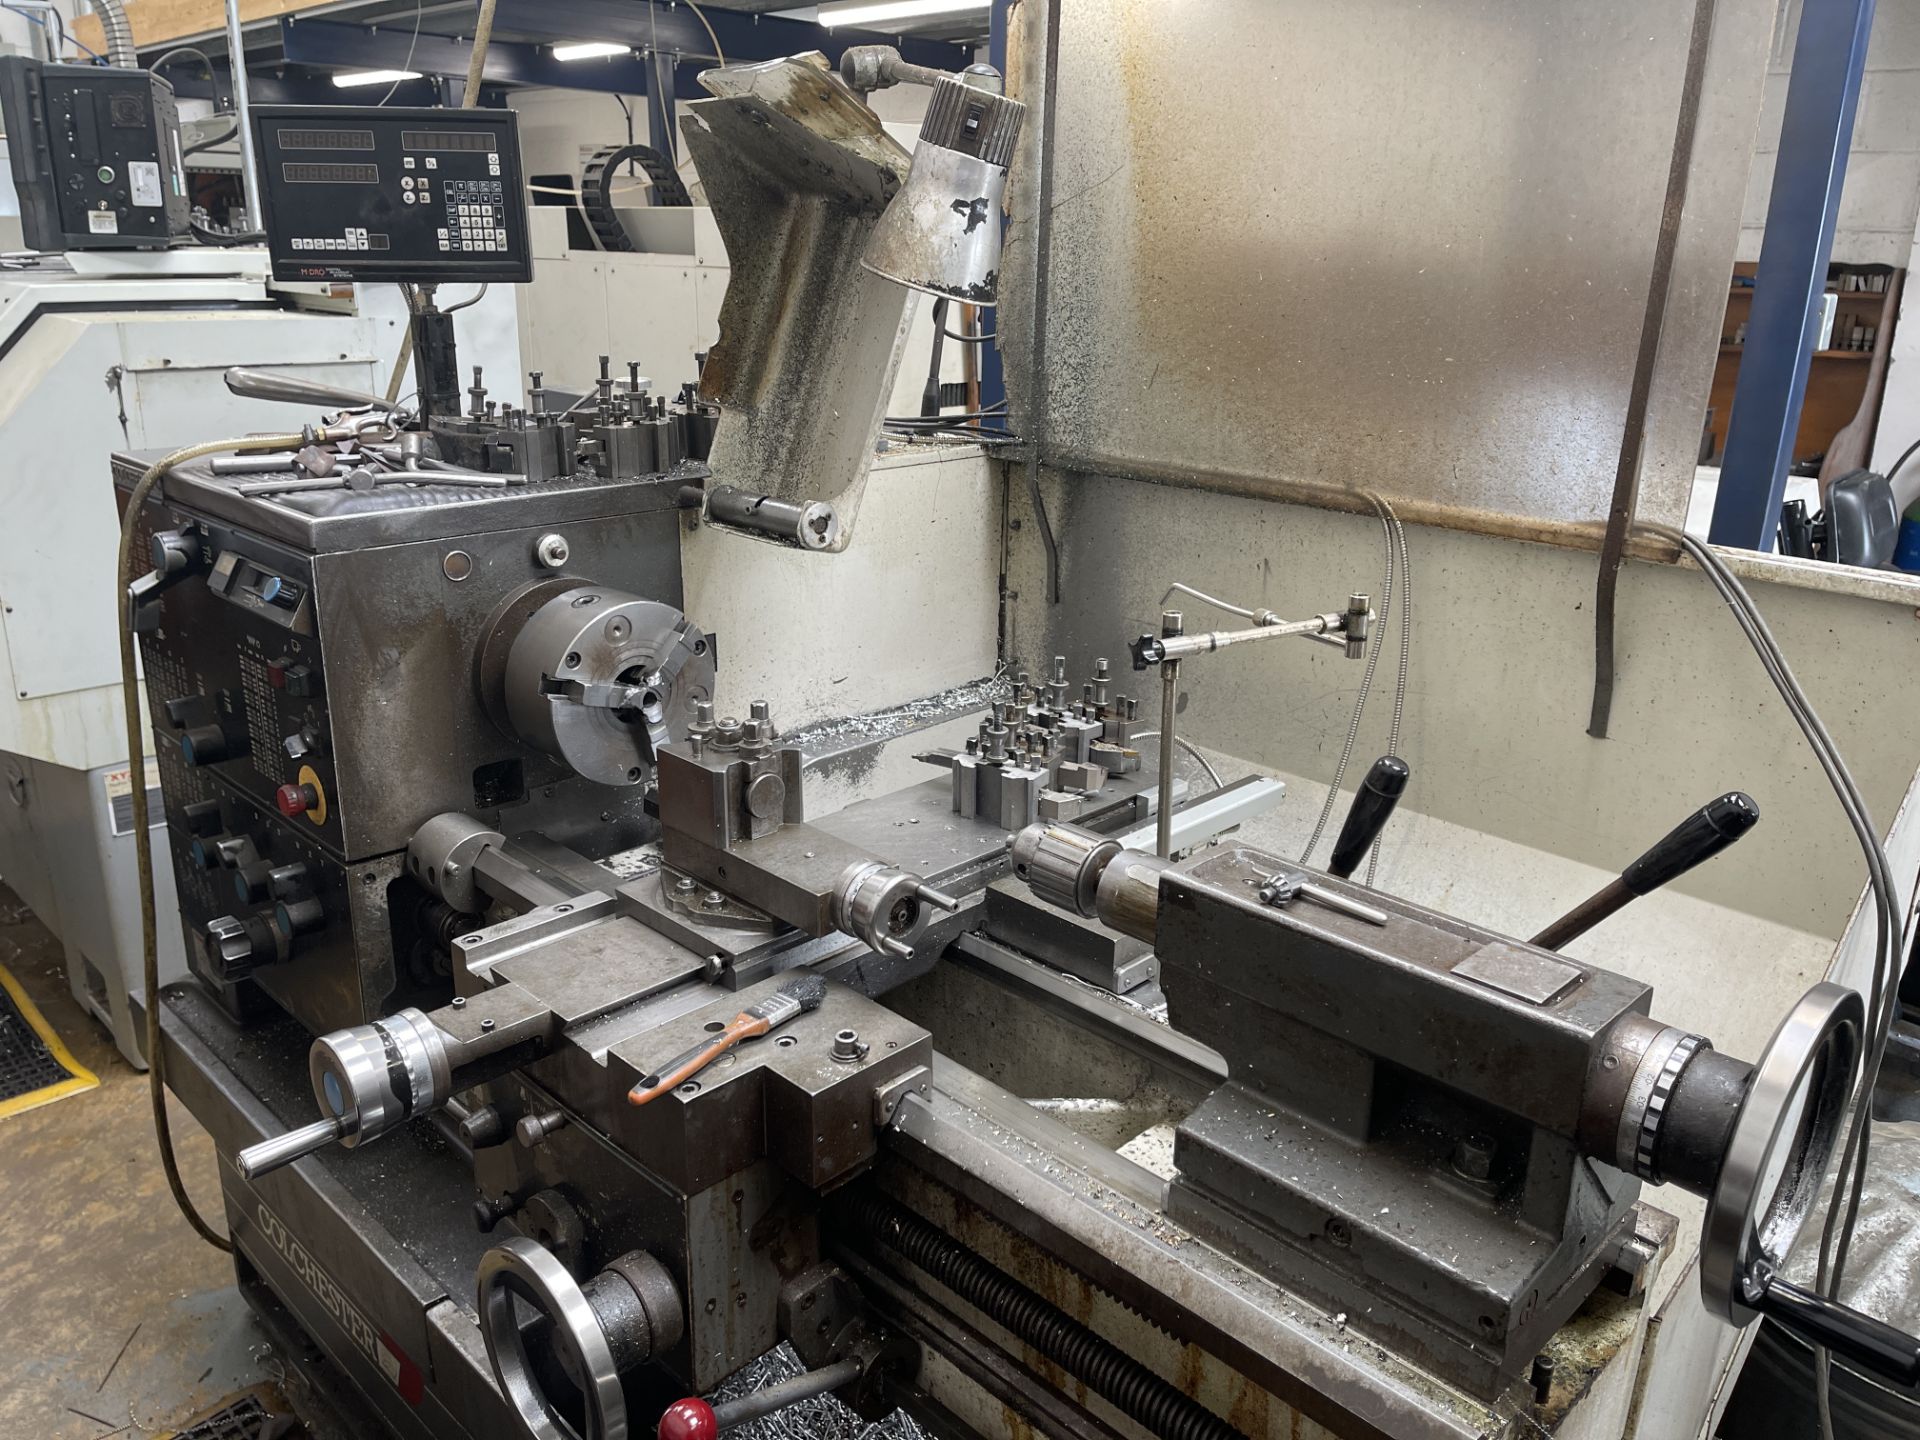 Colchester Mascot 3250 Gap Bed Centre Lathe with M - DRO 2 Axis Control Panel, Serial No.JA/ - Image 5 of 11